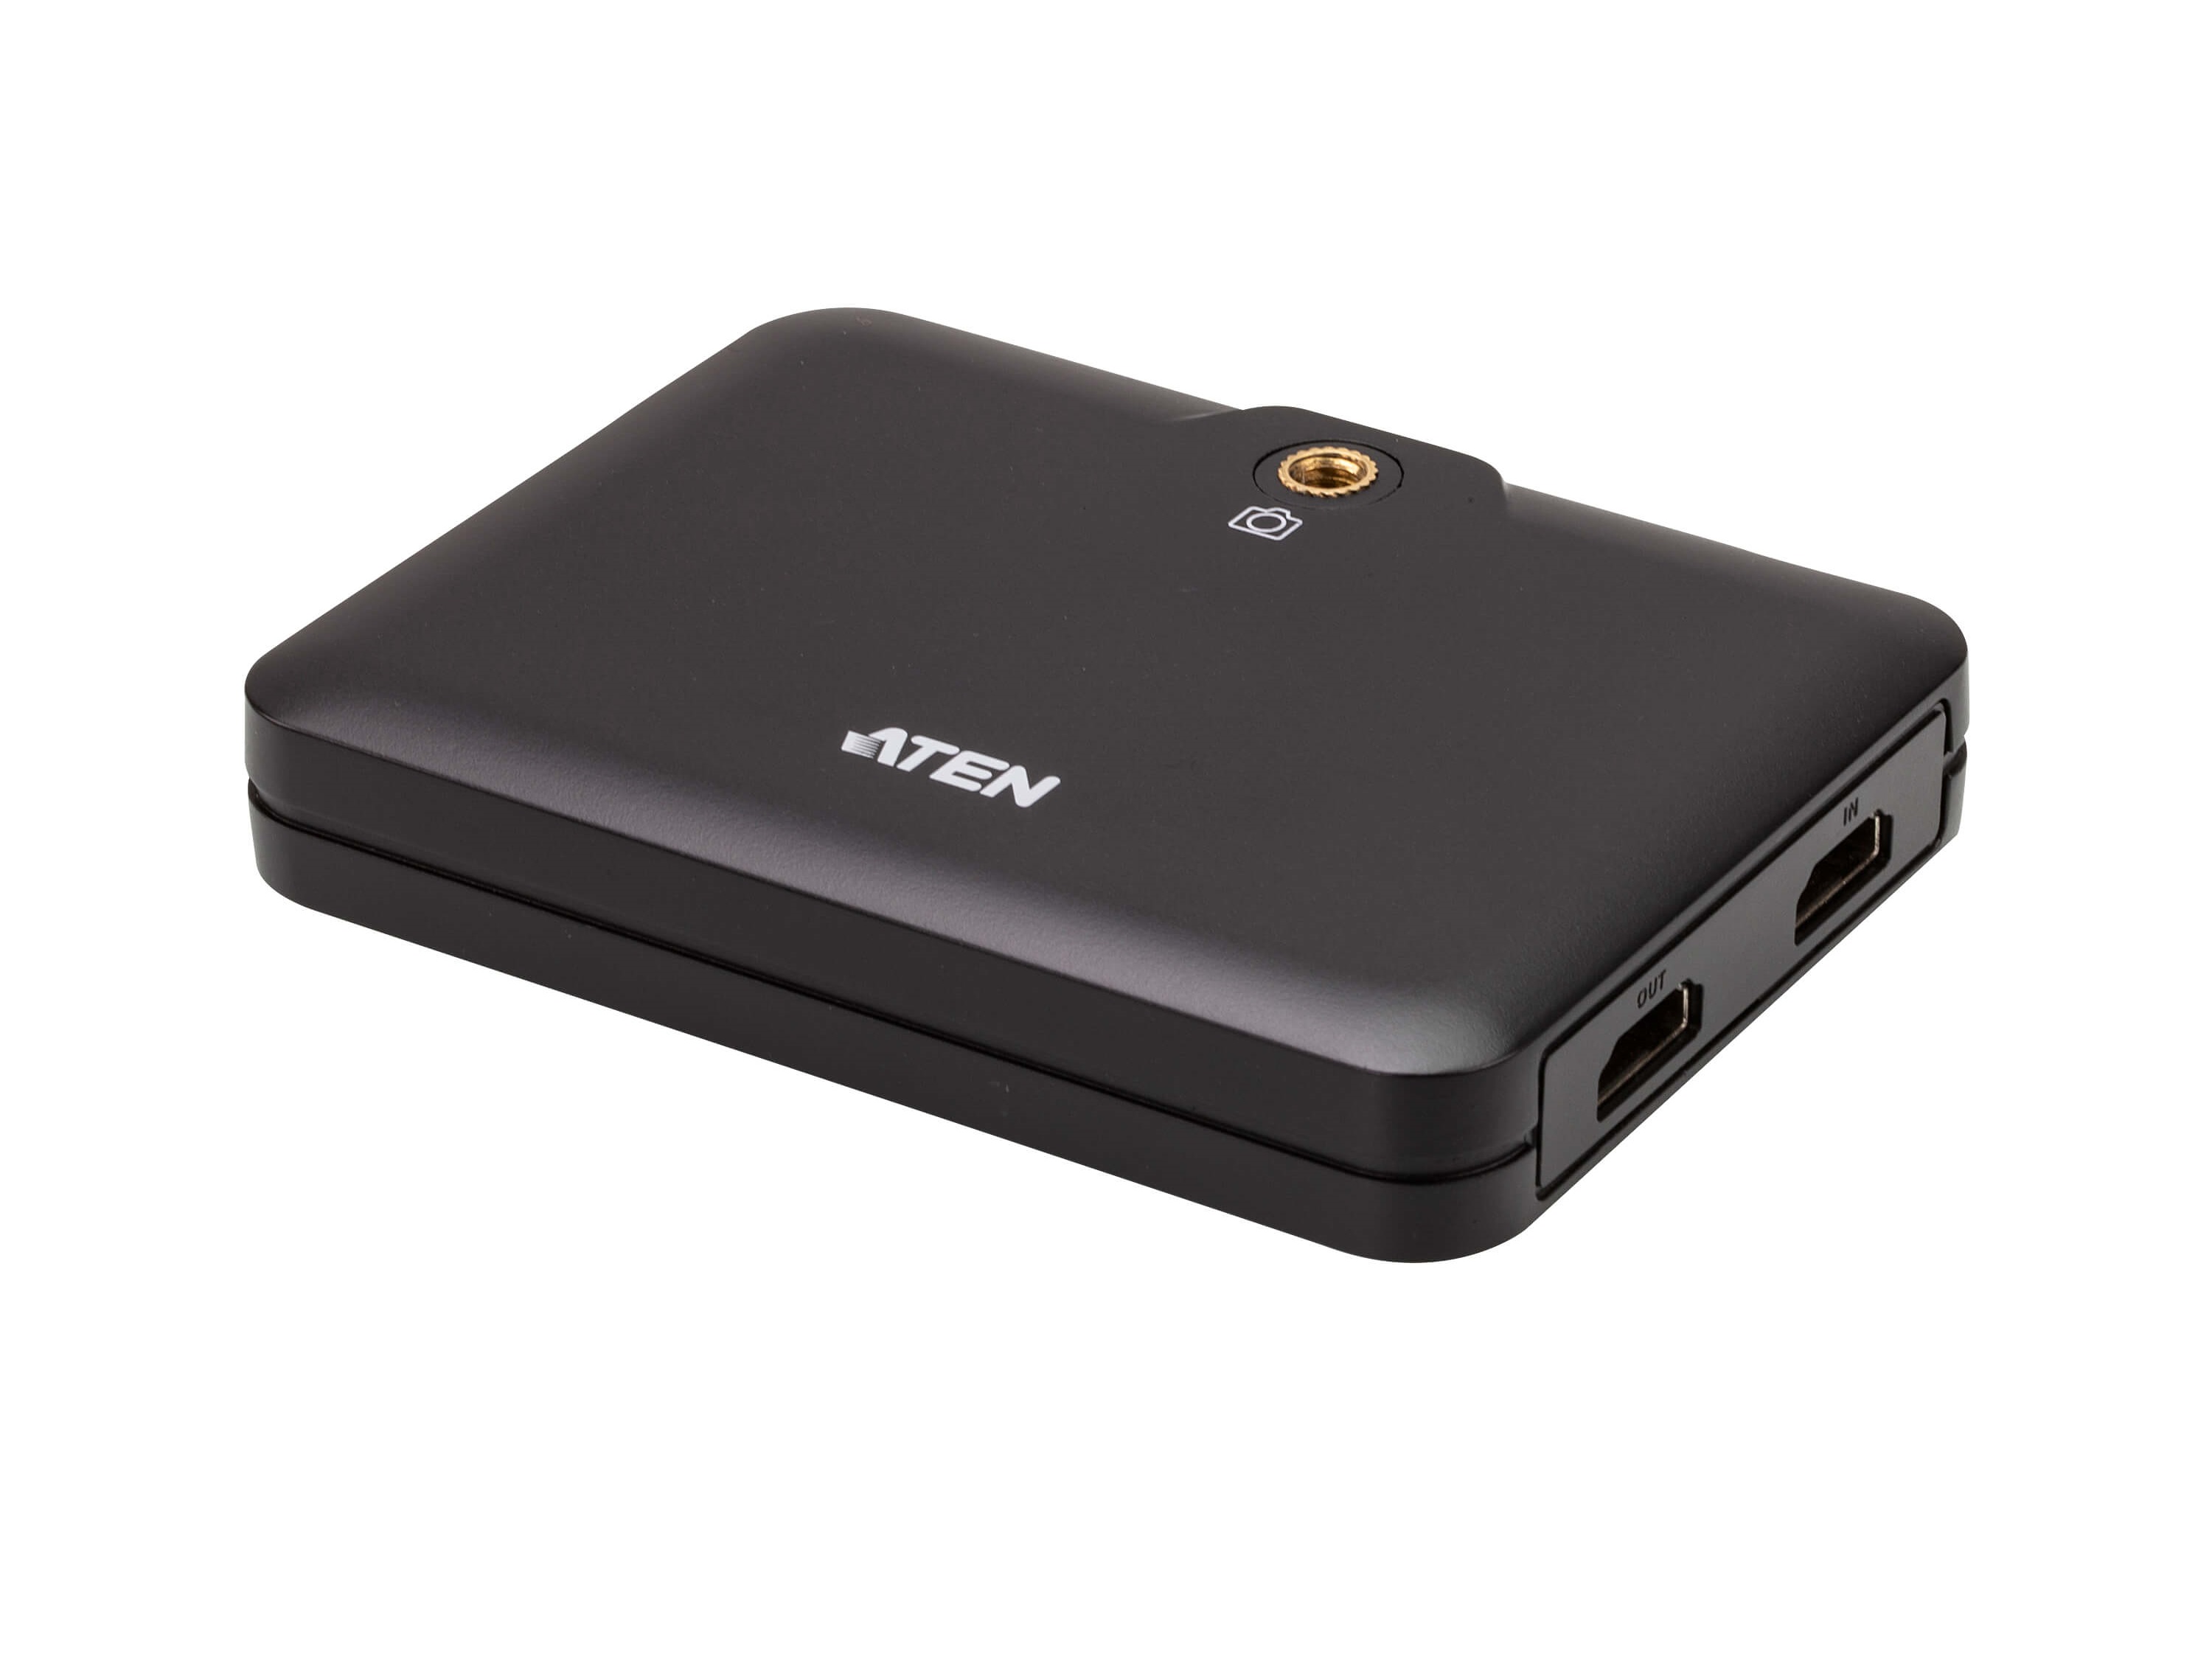 UC3021 CAMLIVE  (HDMI to USB-C UVC Video Capture with PD3.0 Power Pass-Through) by Aten